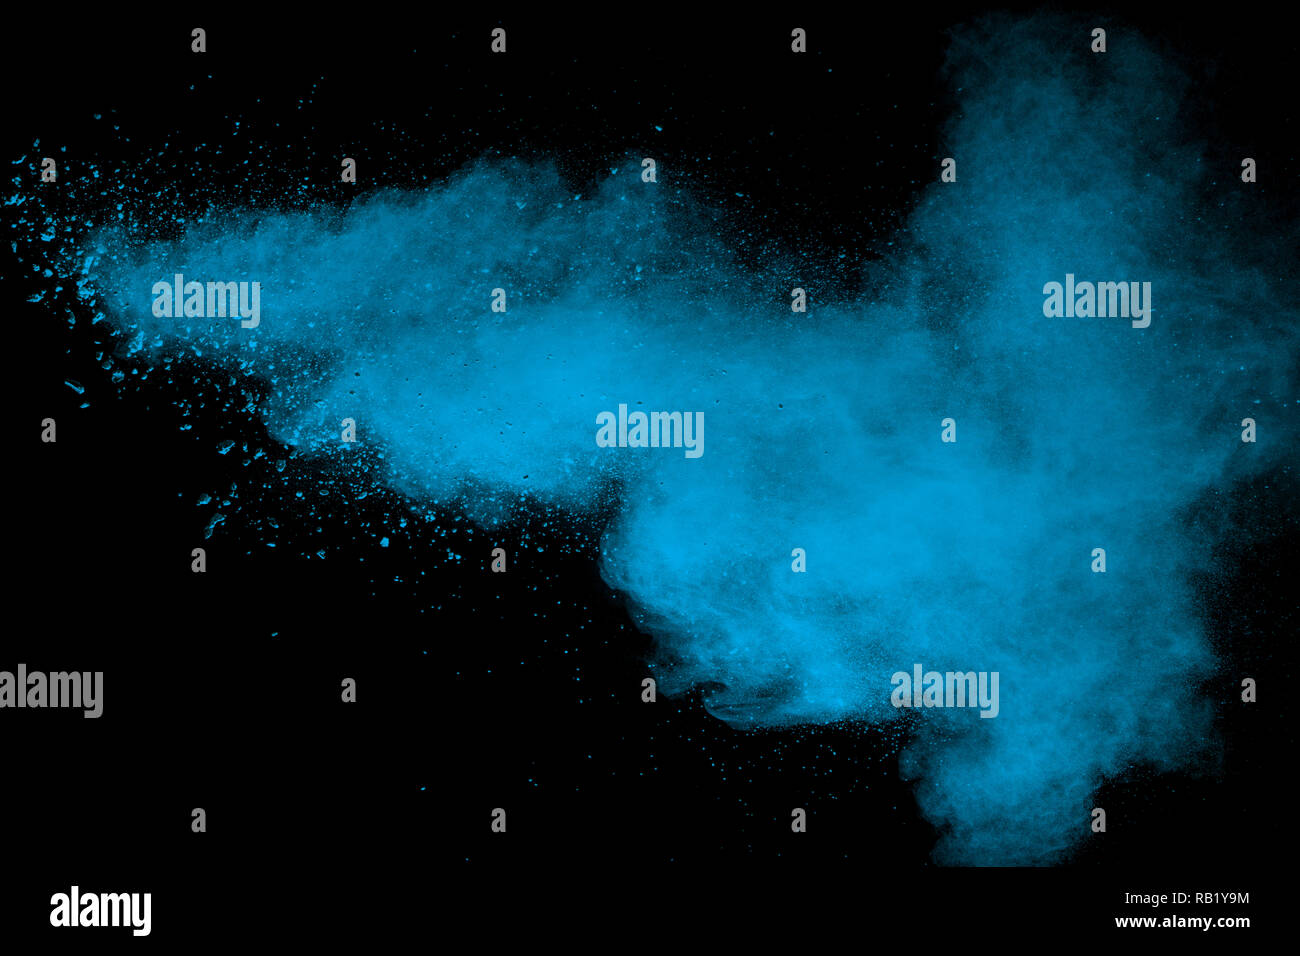 Blue powder explode cloud on black background. Launched blue dust particles splash on  background. Stock Photo